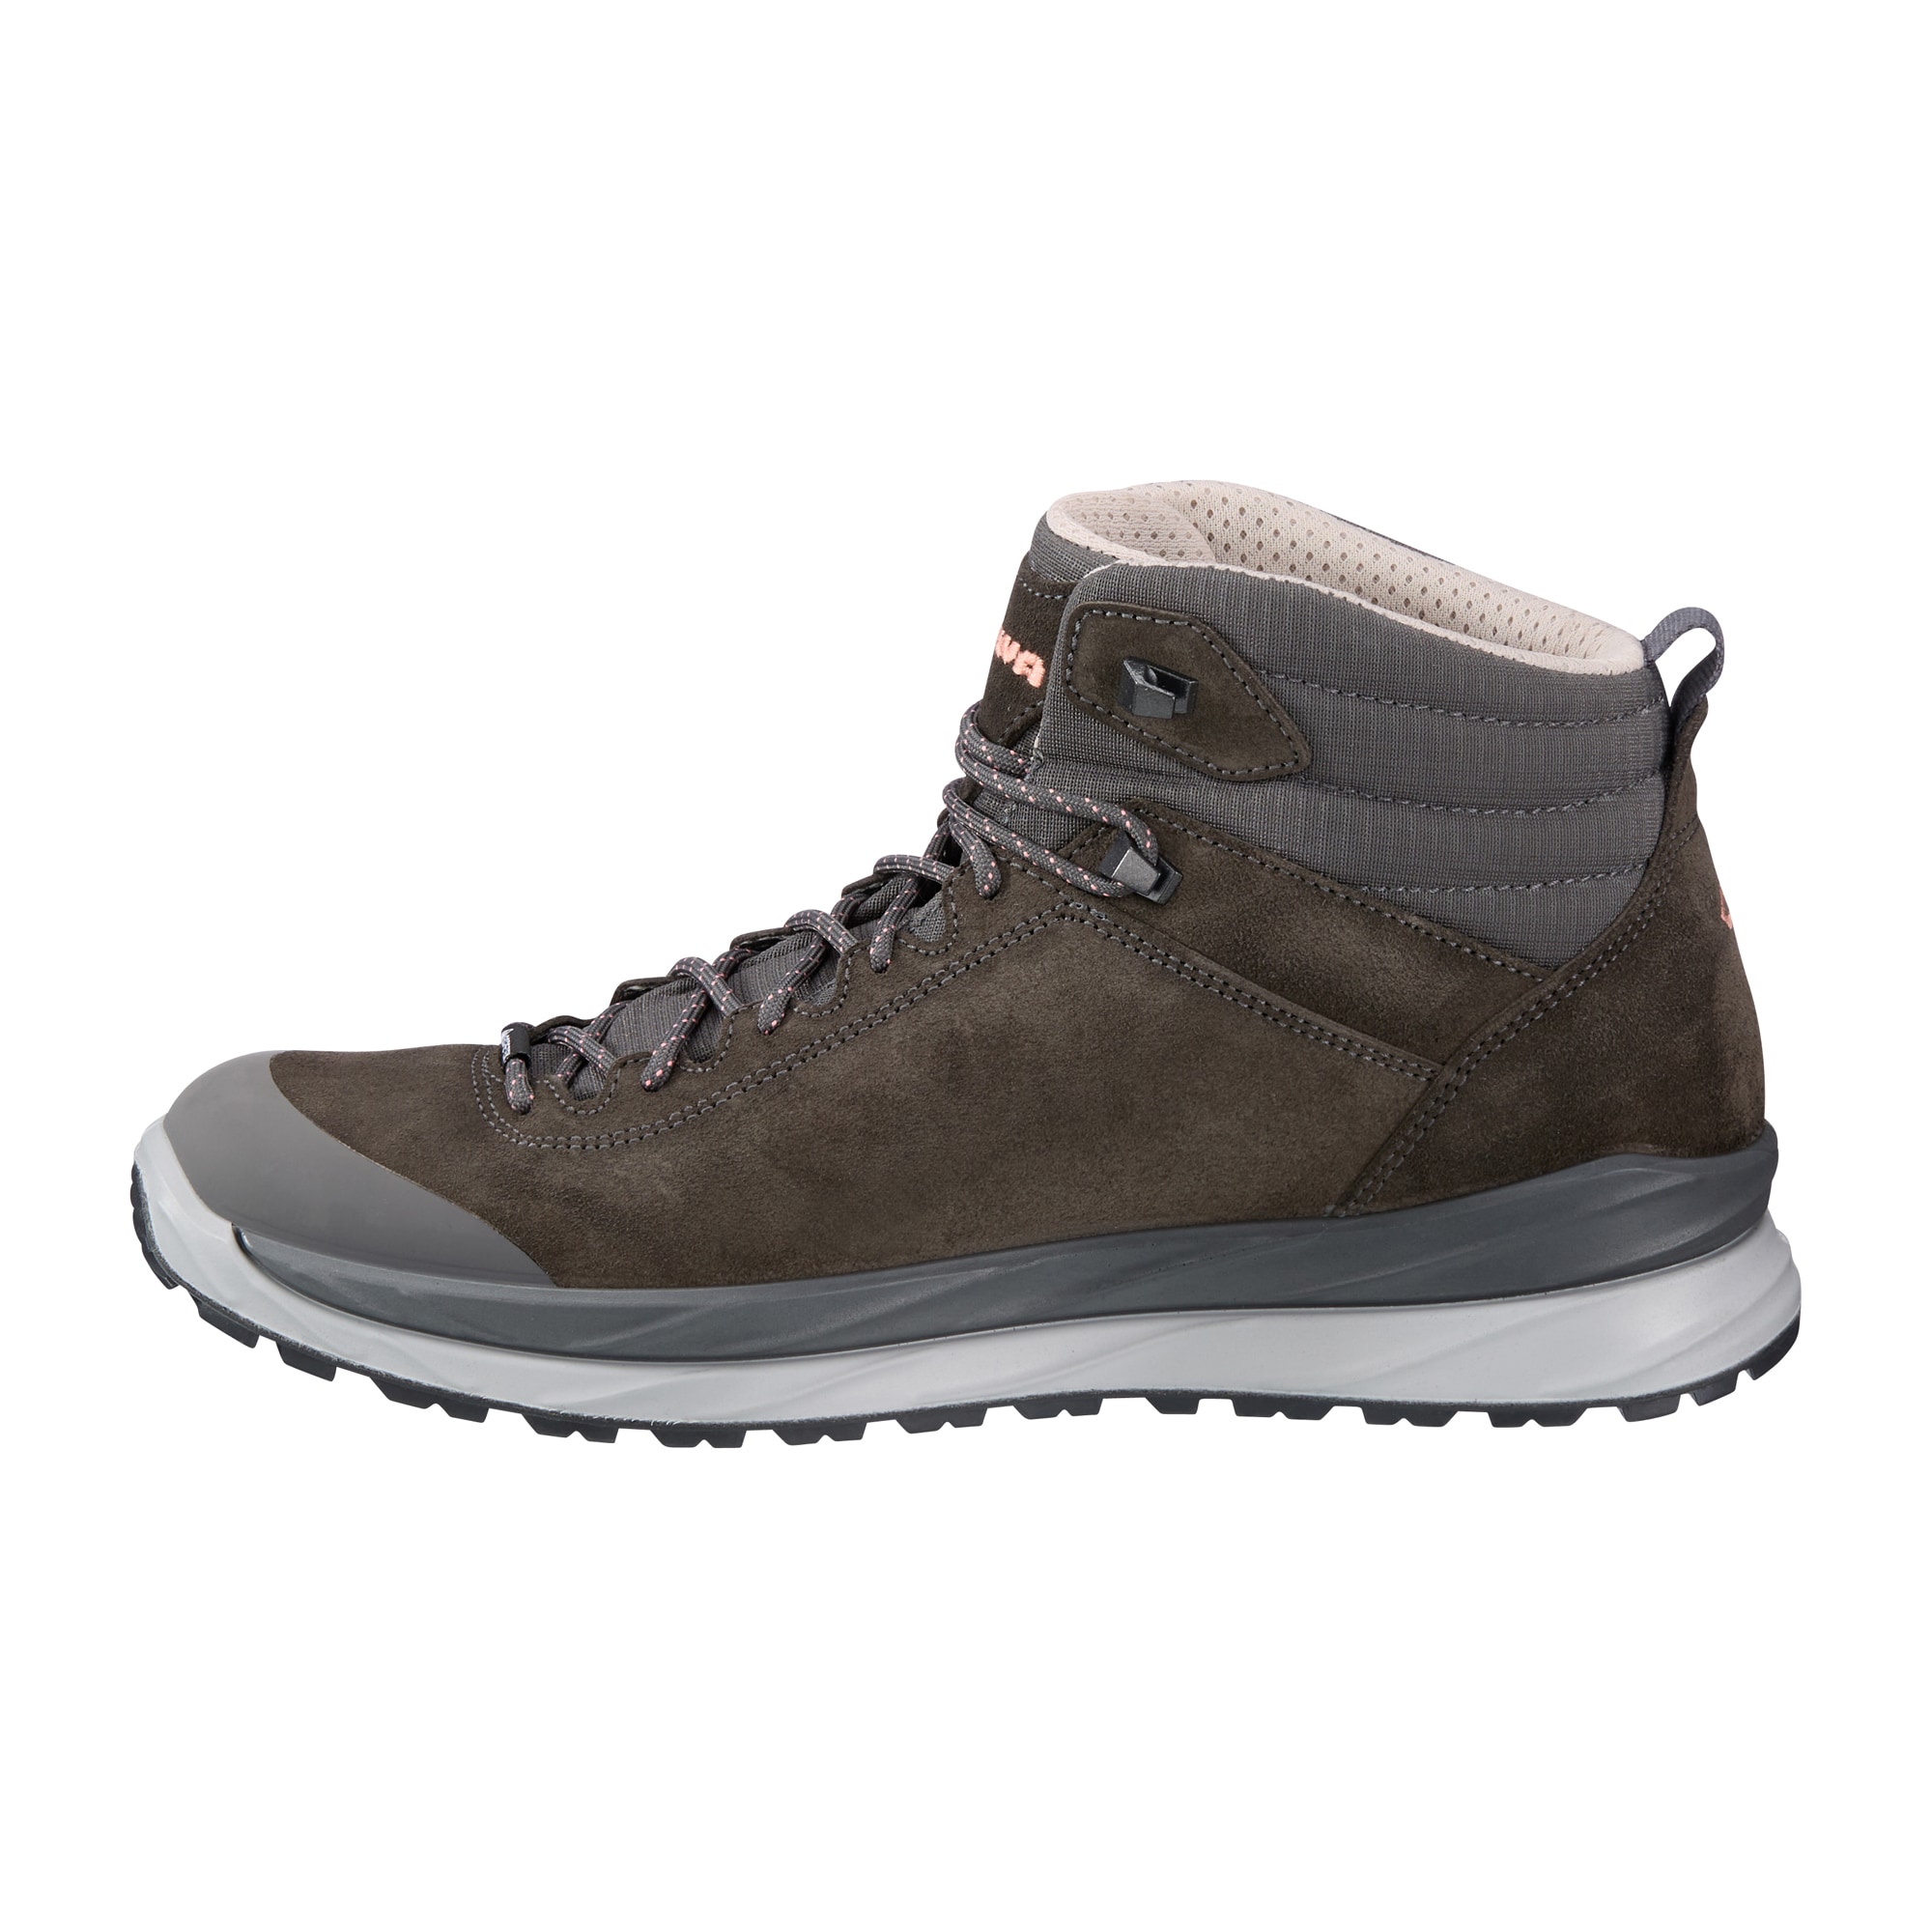 Purchase the LOWA Women's Boots Malta GTX Mid anthracite by ASMC